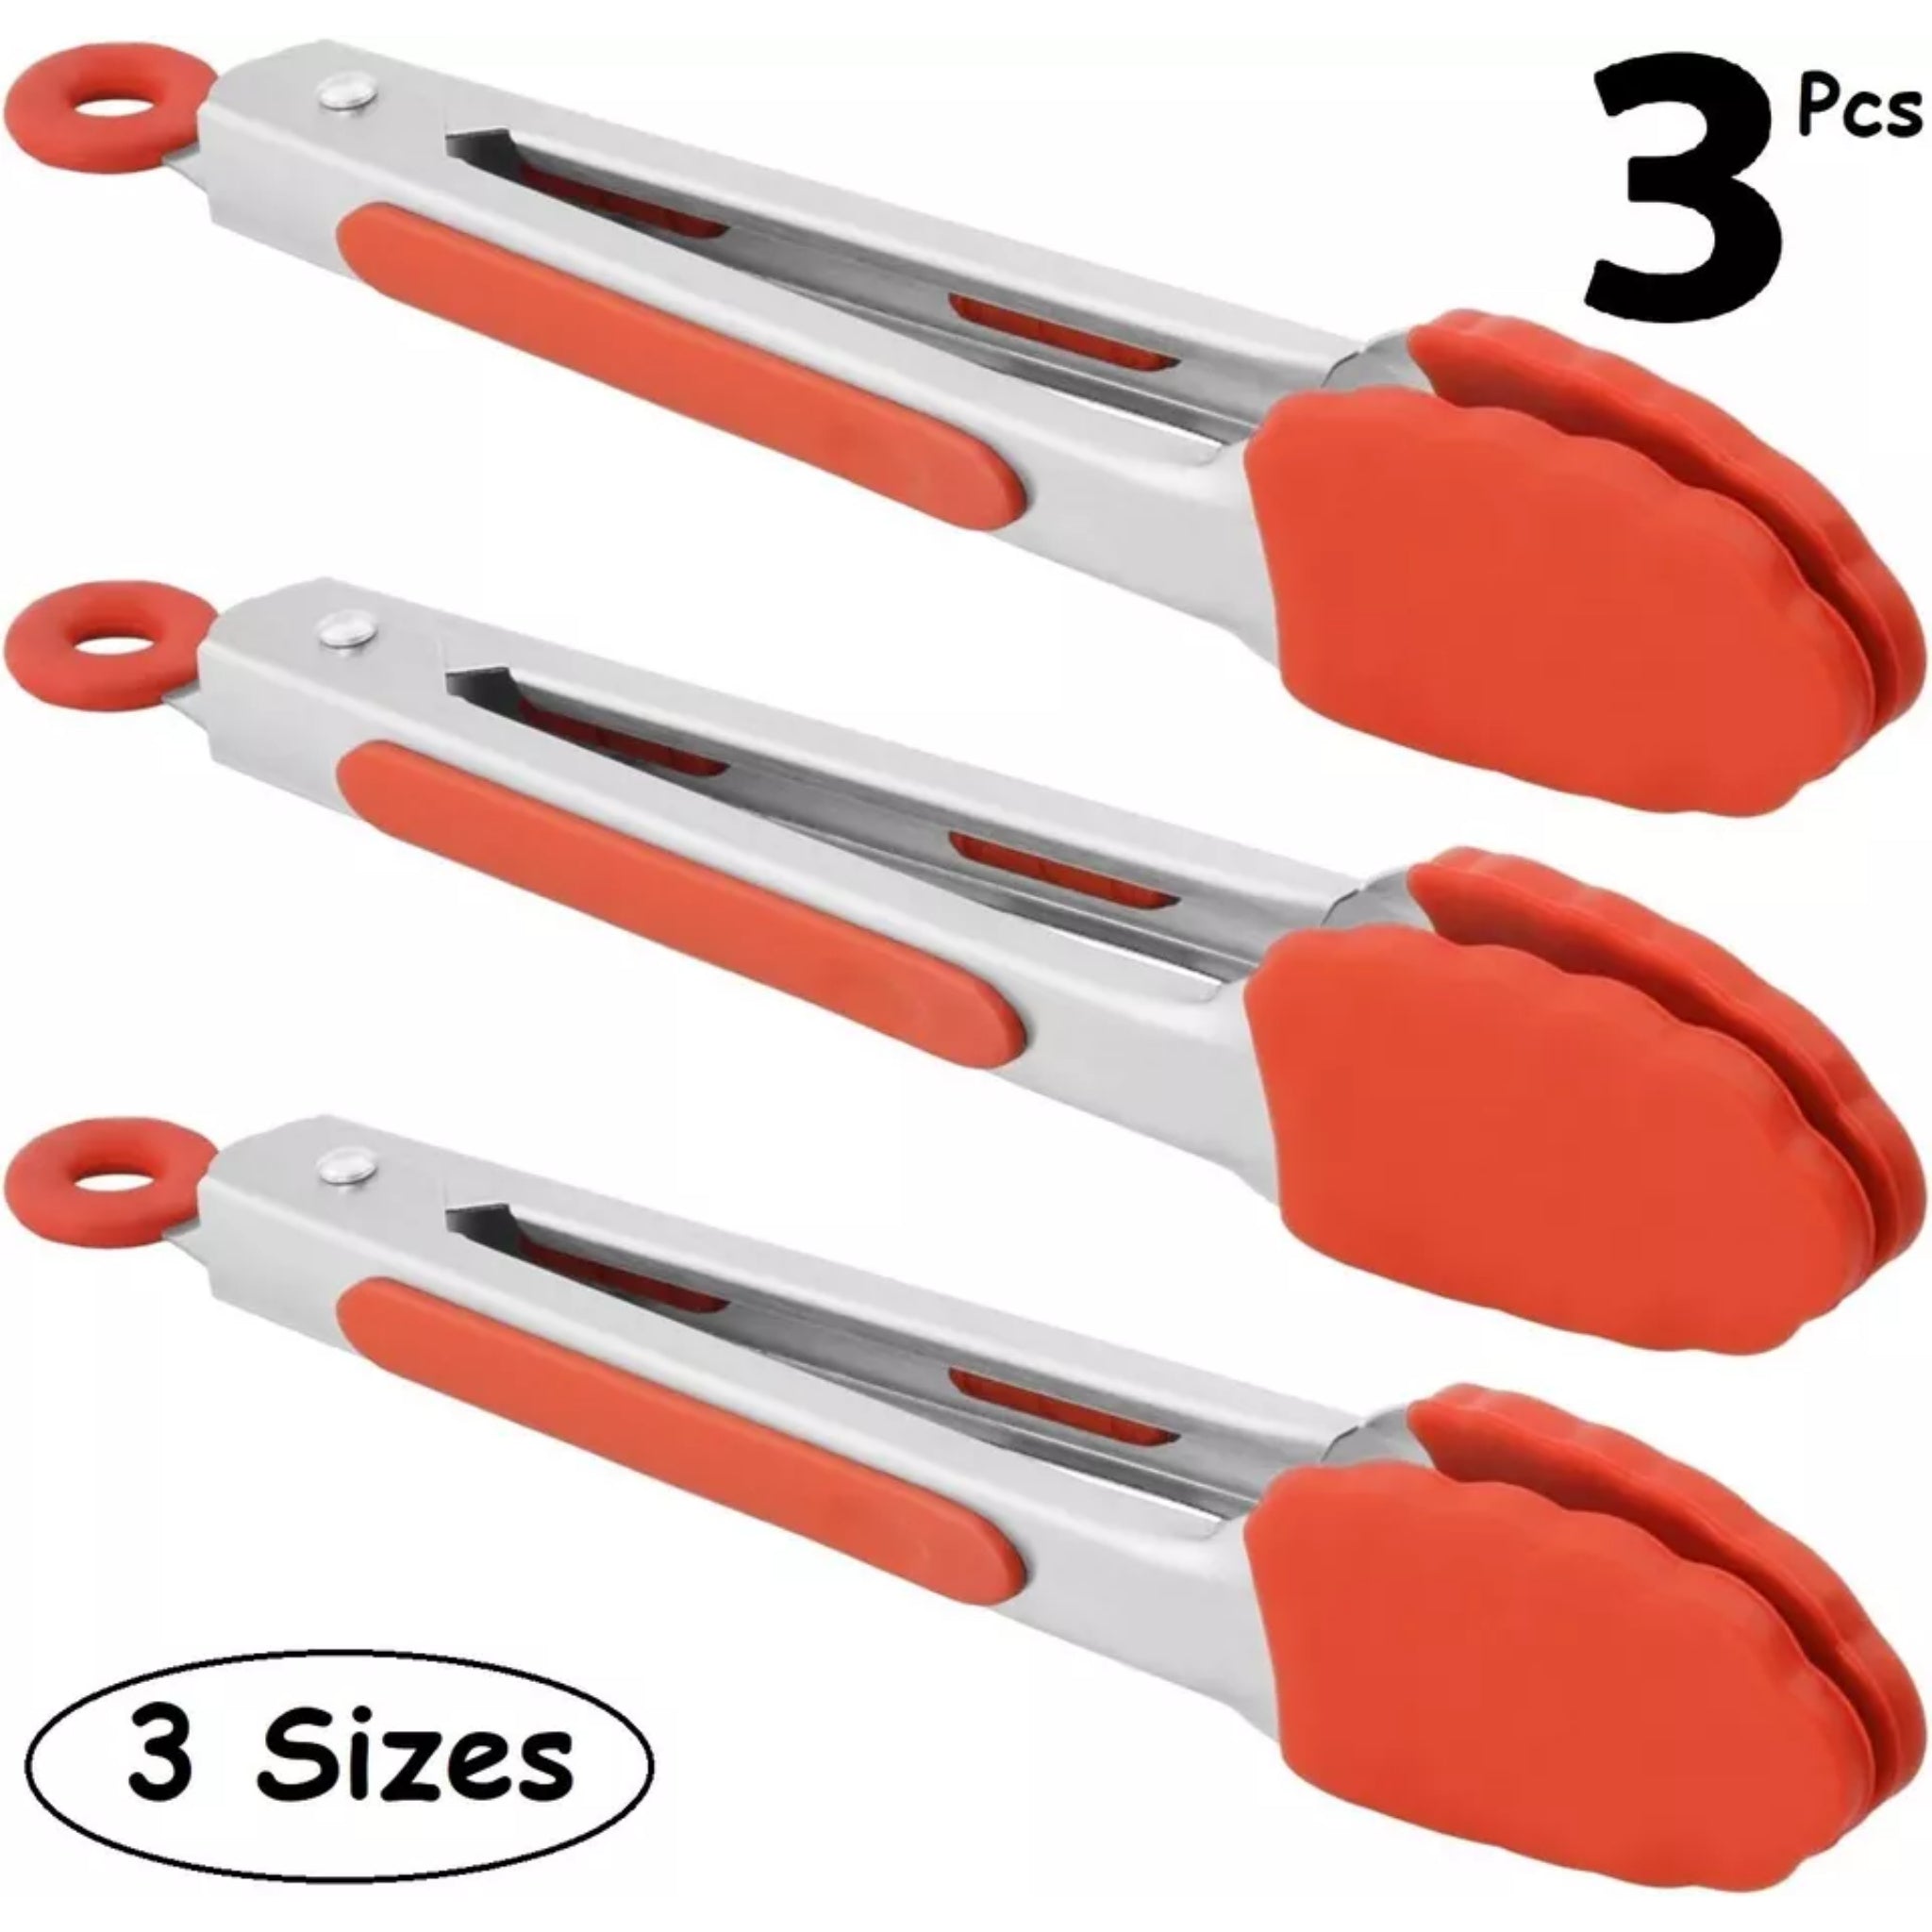 Beclen Harp 3pc Silicone Kitchen Cooking Salad Serving BBQ Tong Stainless Steel Utensil Set